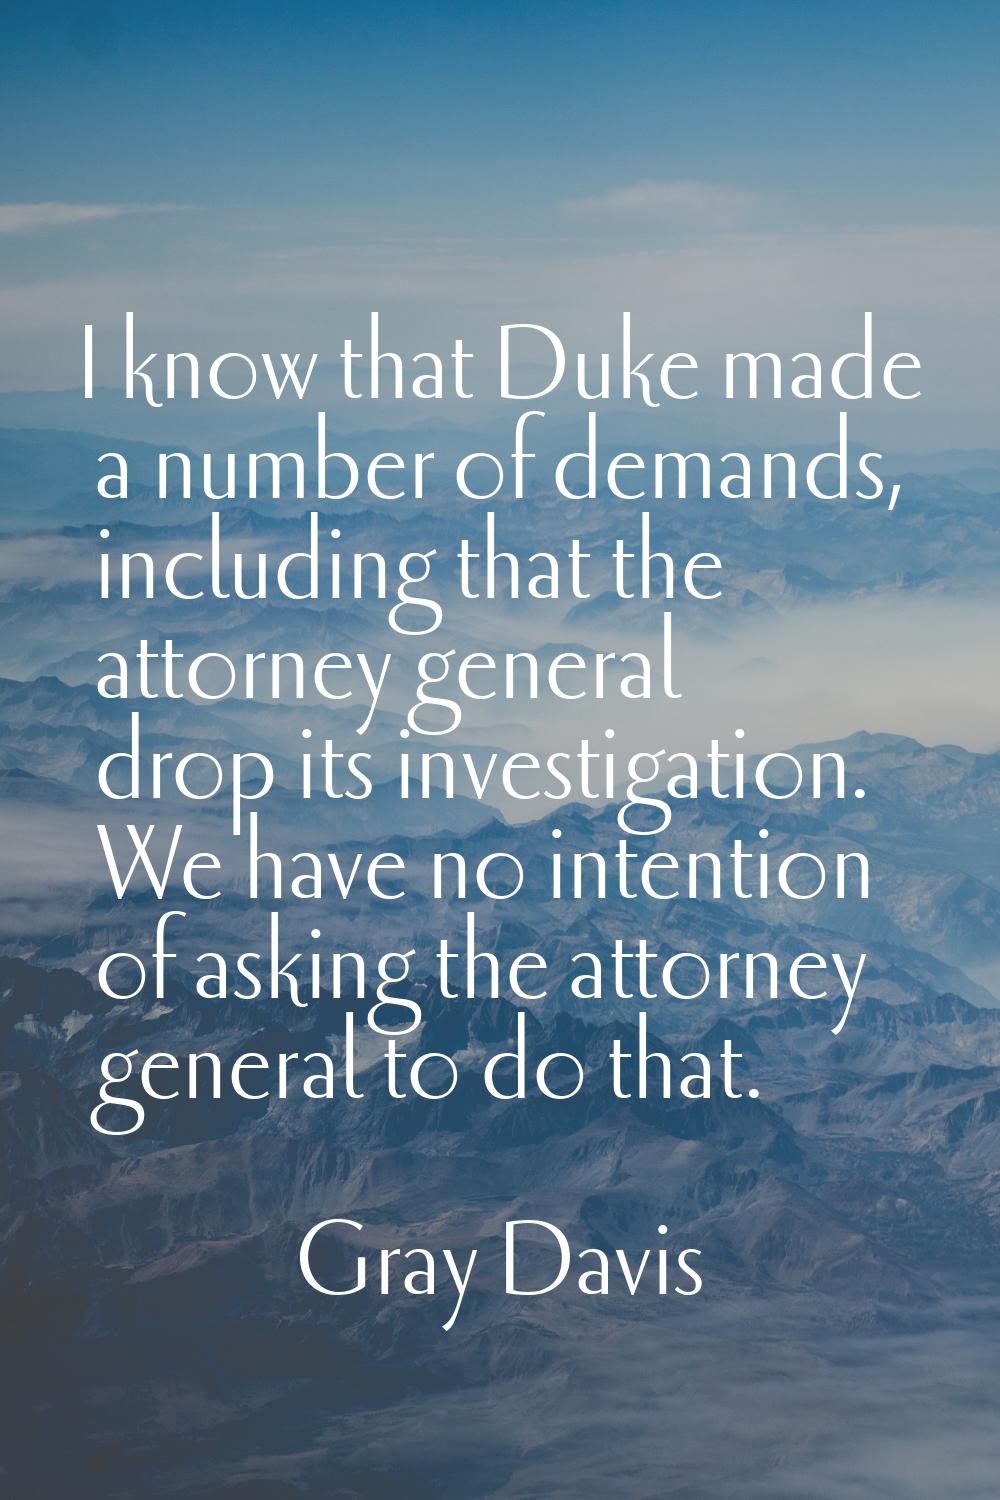 I know that Duke made a number of demands, including that the attorney general drop its investigati